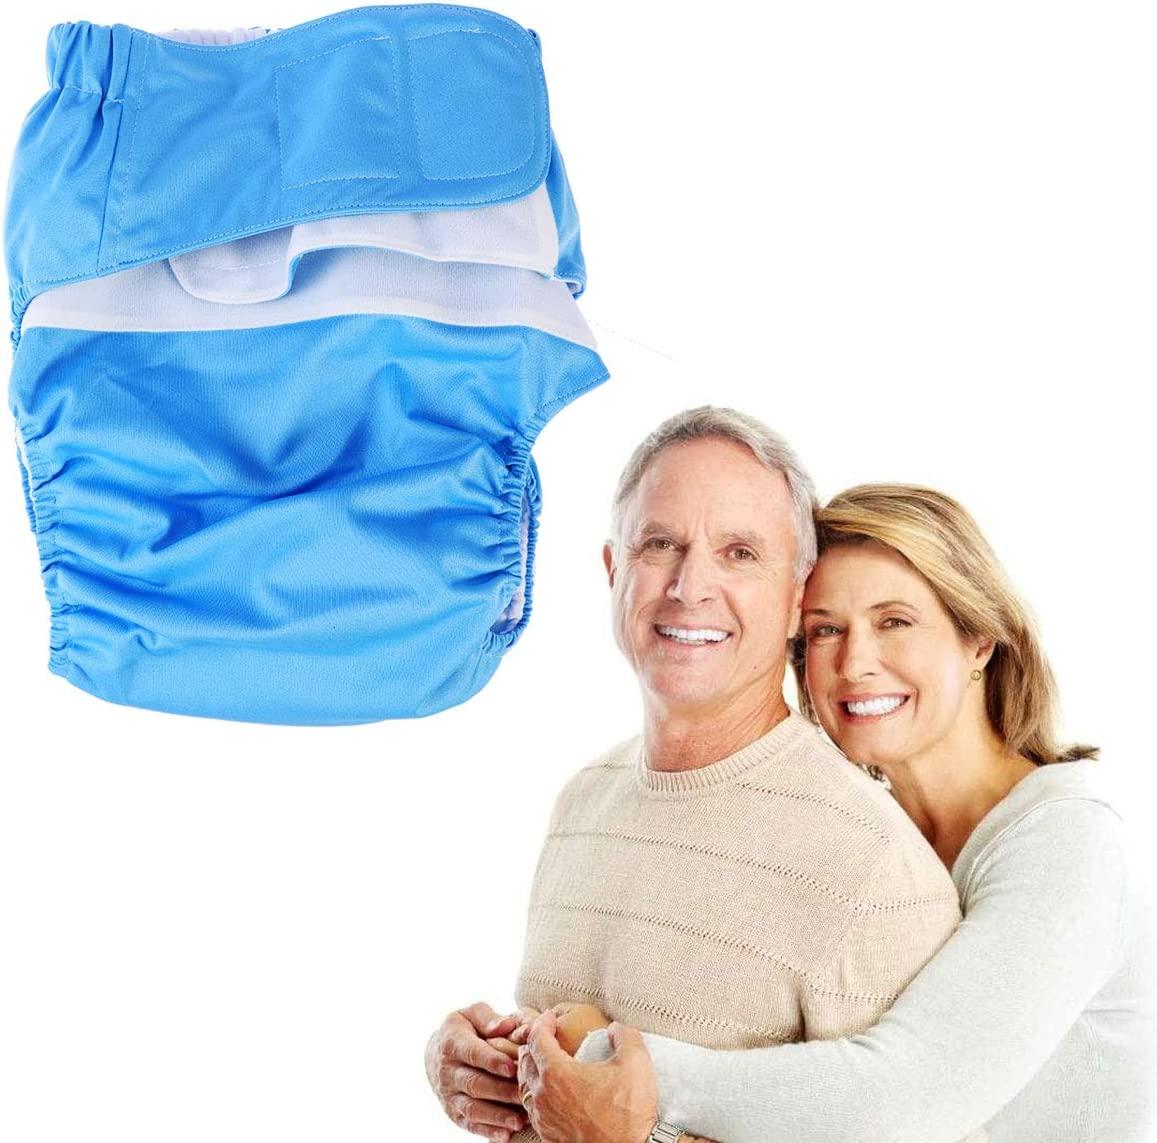 Healifty Washable underwear2pcs Adult Diapers Covers Reusable